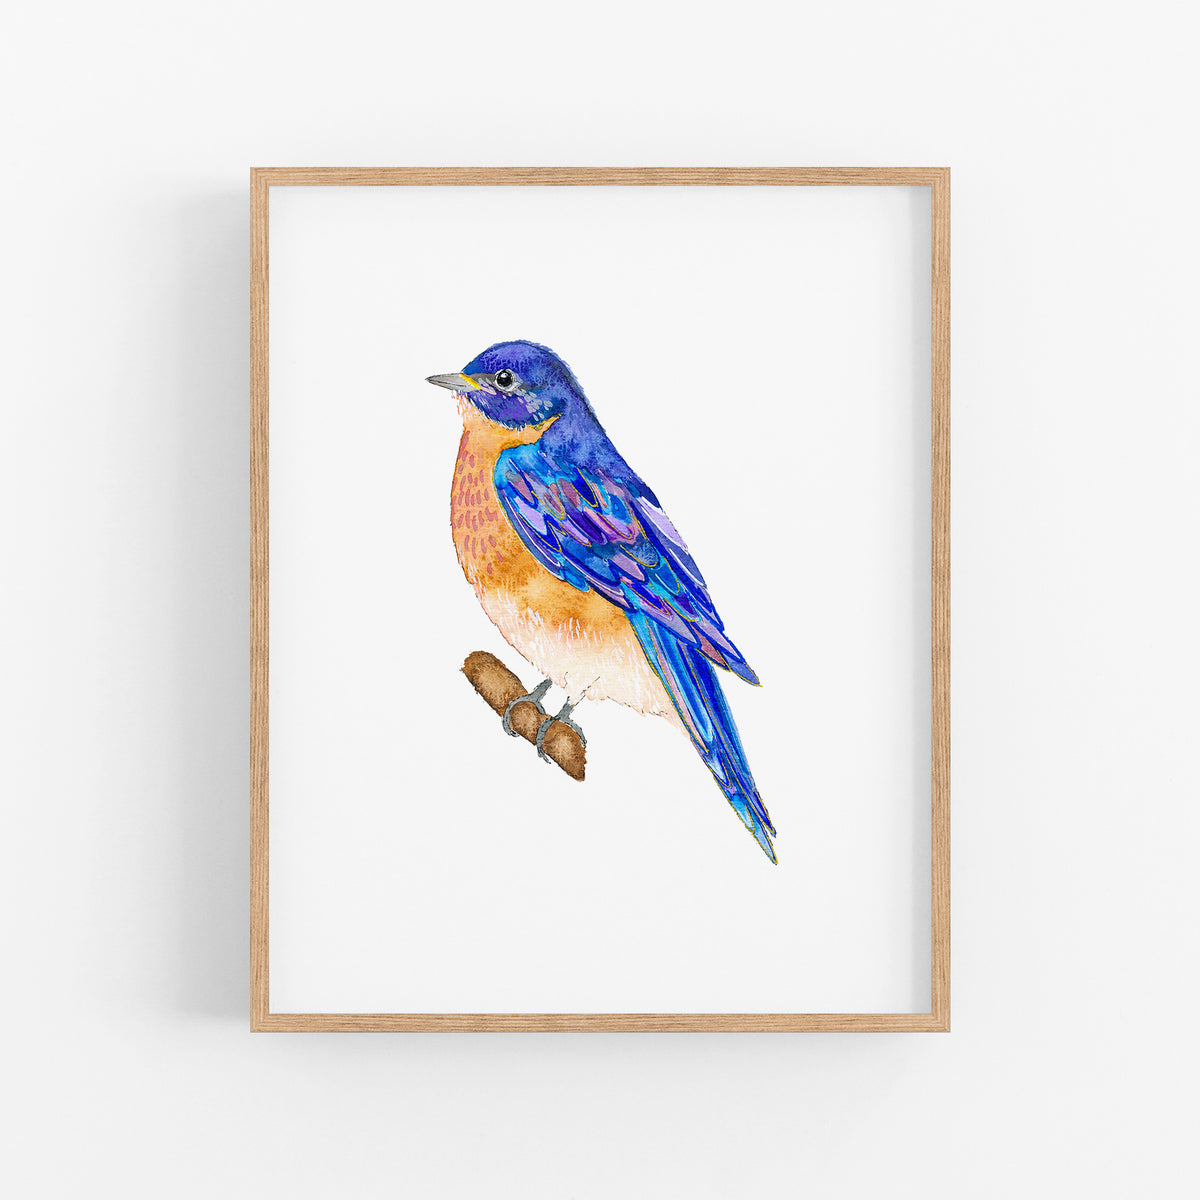 a painting of a blue bird sitting on a branch